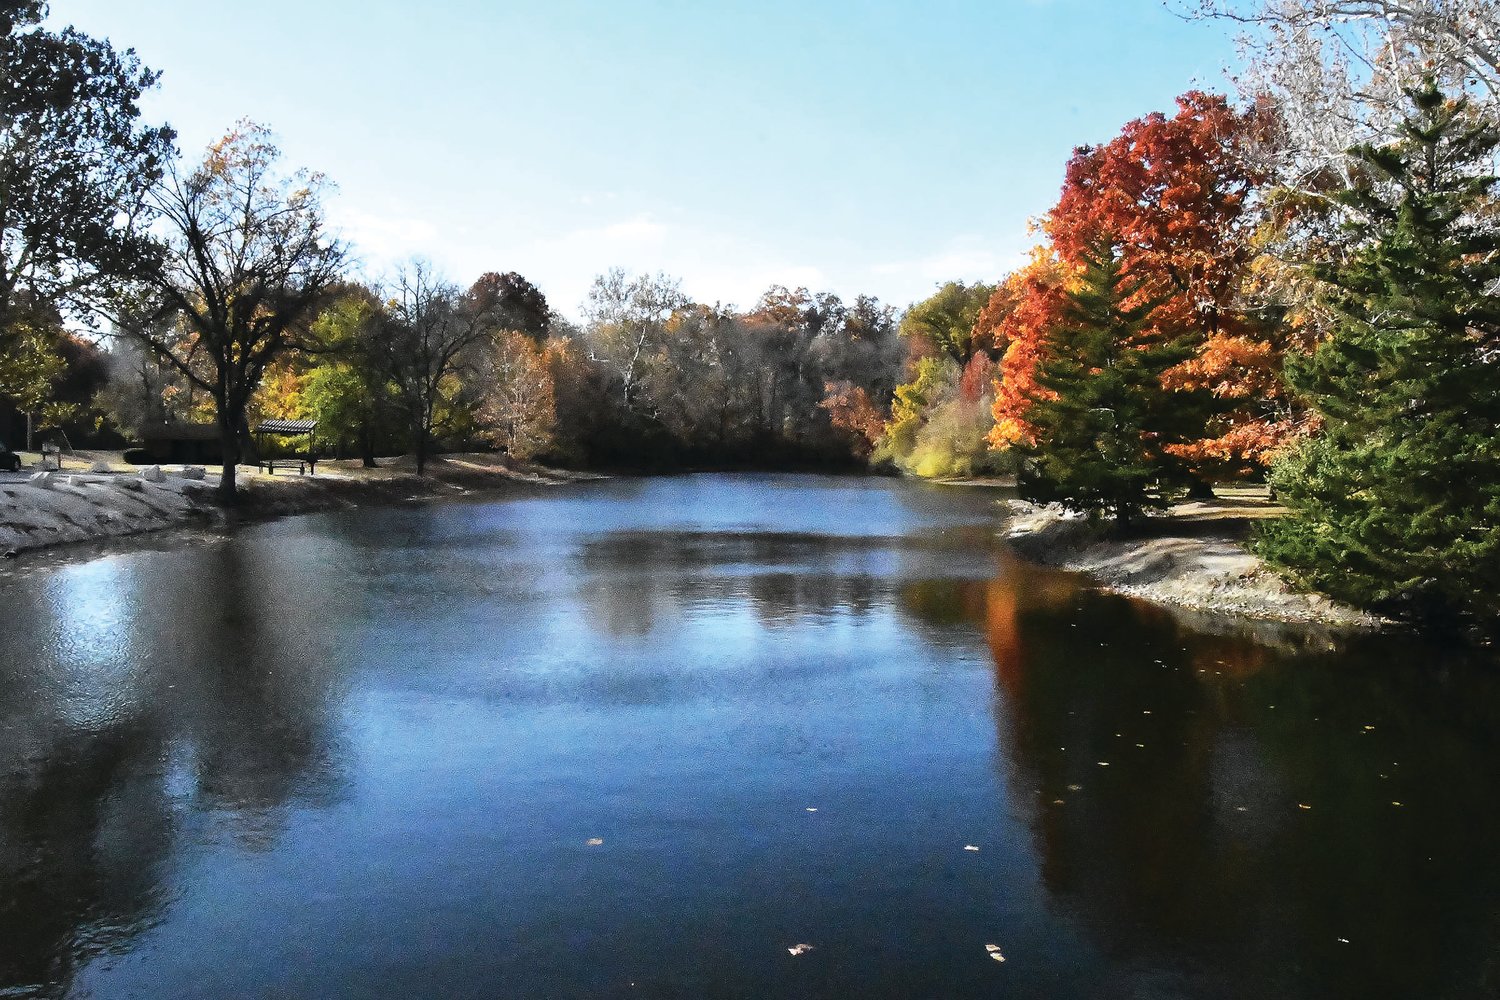 The lake inside Lions Beuth Park covers more than two acres, which is more than 8,800 square feet. Next Monday, Oct. 31, the Missouri Department of Conservation will be conducting a trout stocking, adding about 1,000 fish to Beuth Lake Park.